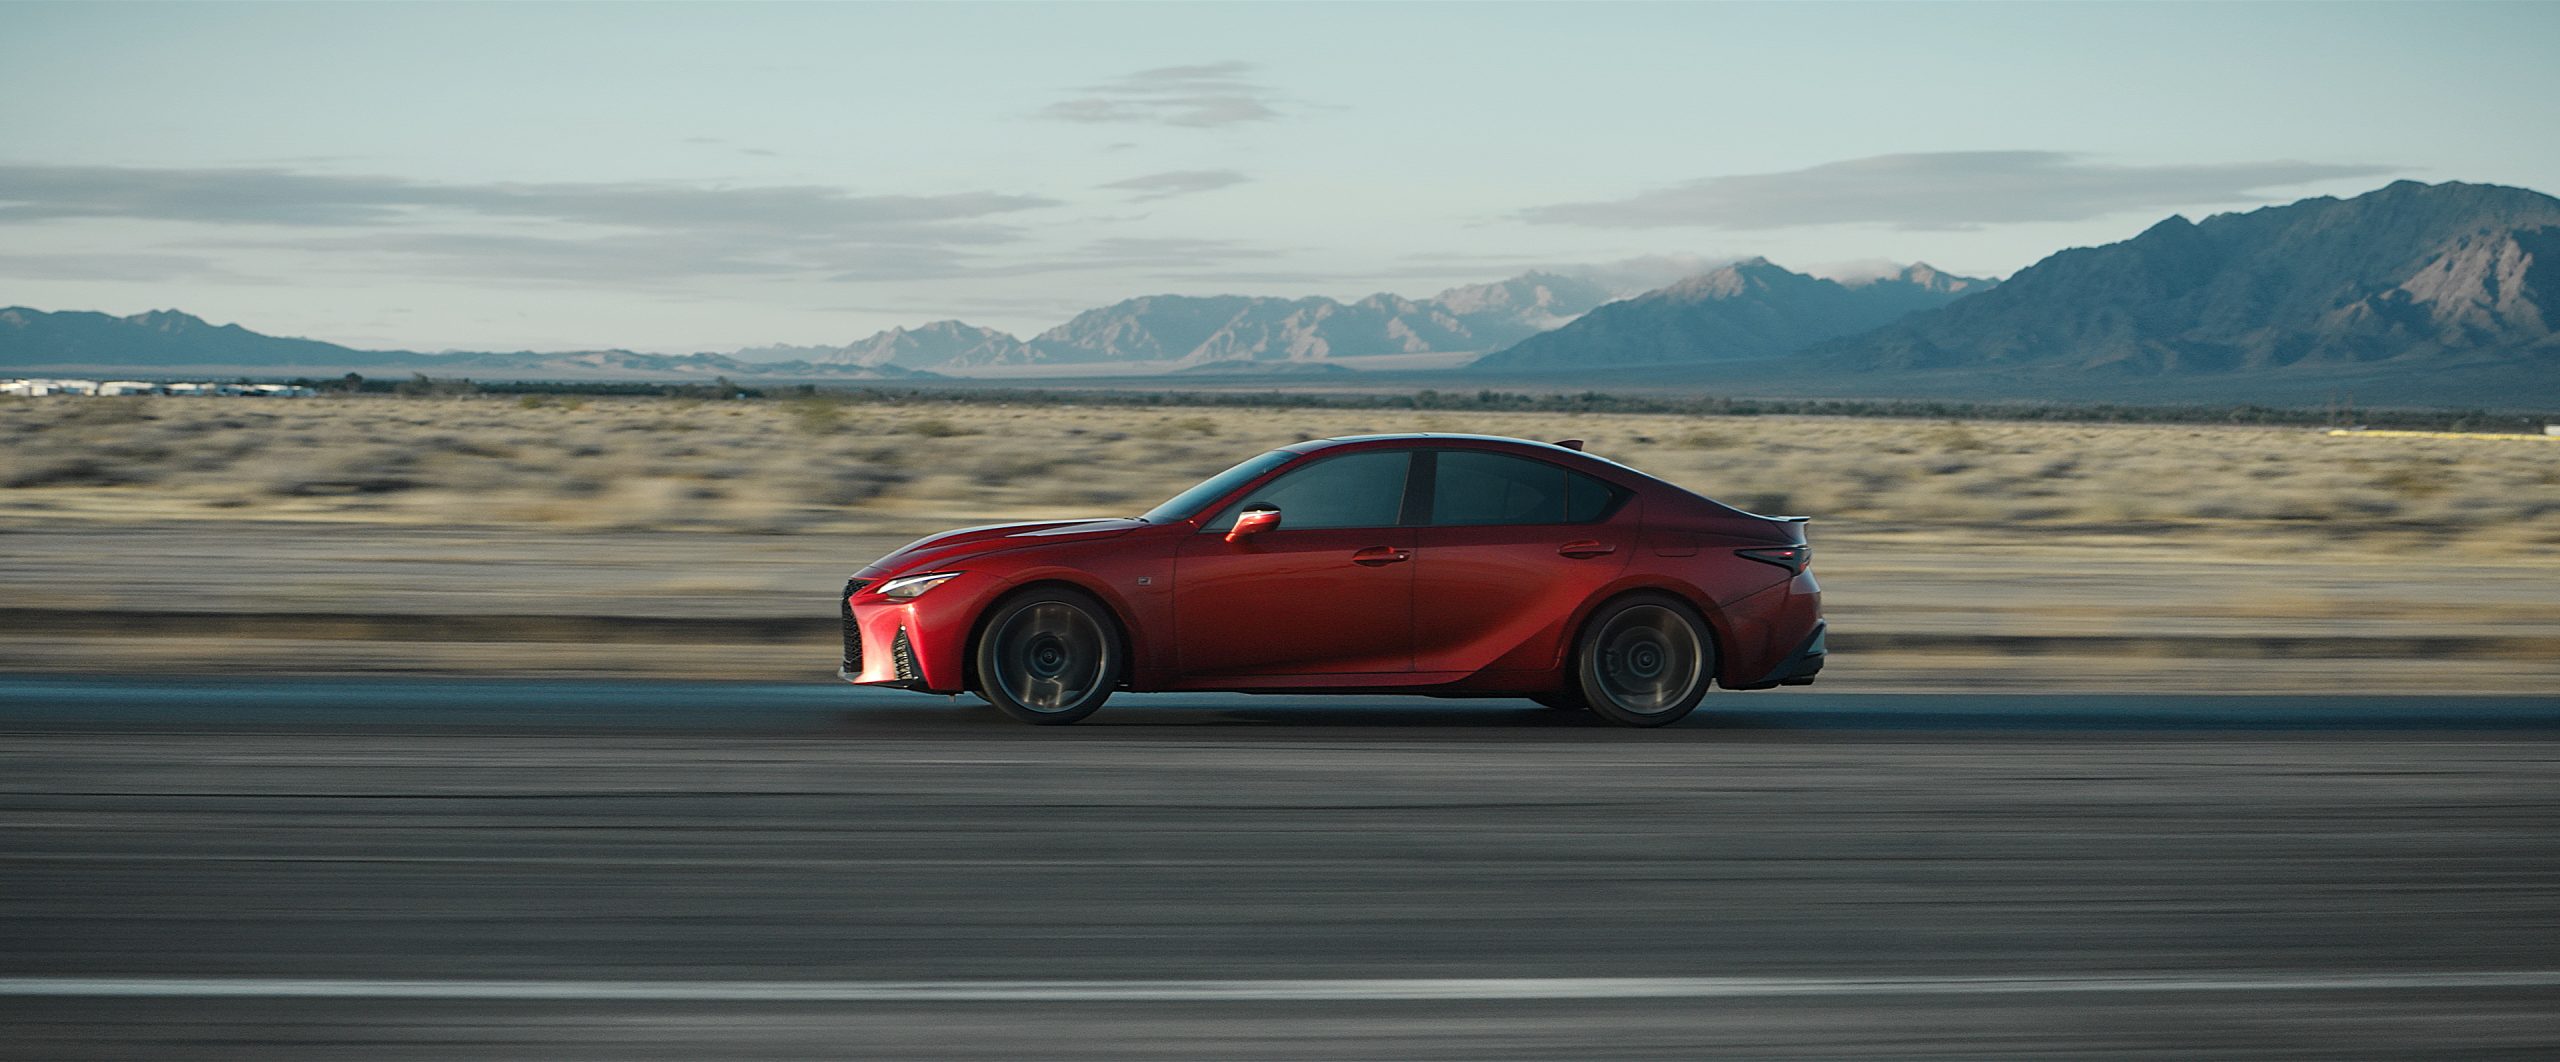 The Lexus IS500 will live on well after 2025